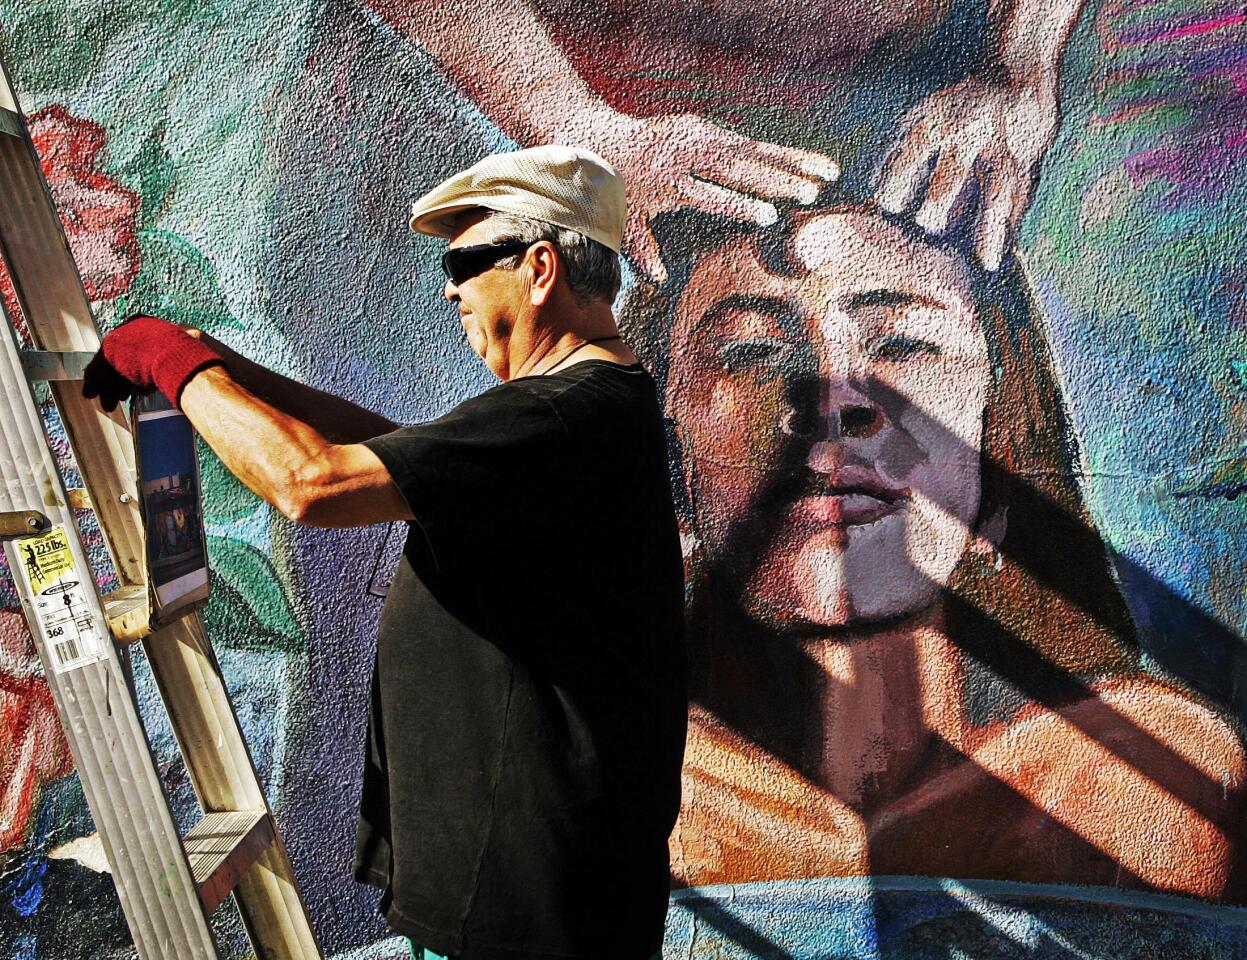 Los Angeles' murals -- a rich legacy on display in the open air -- are endangered by graffiti and the elements. Ernesto de la Loza sets up his materials as he races to clean and stabilize his "Resurrection of the Green Planet," a 1991 creation on the wall of a convenience store at Cesar E. Chavez Avenue and Breed Street in Boyle Heights.